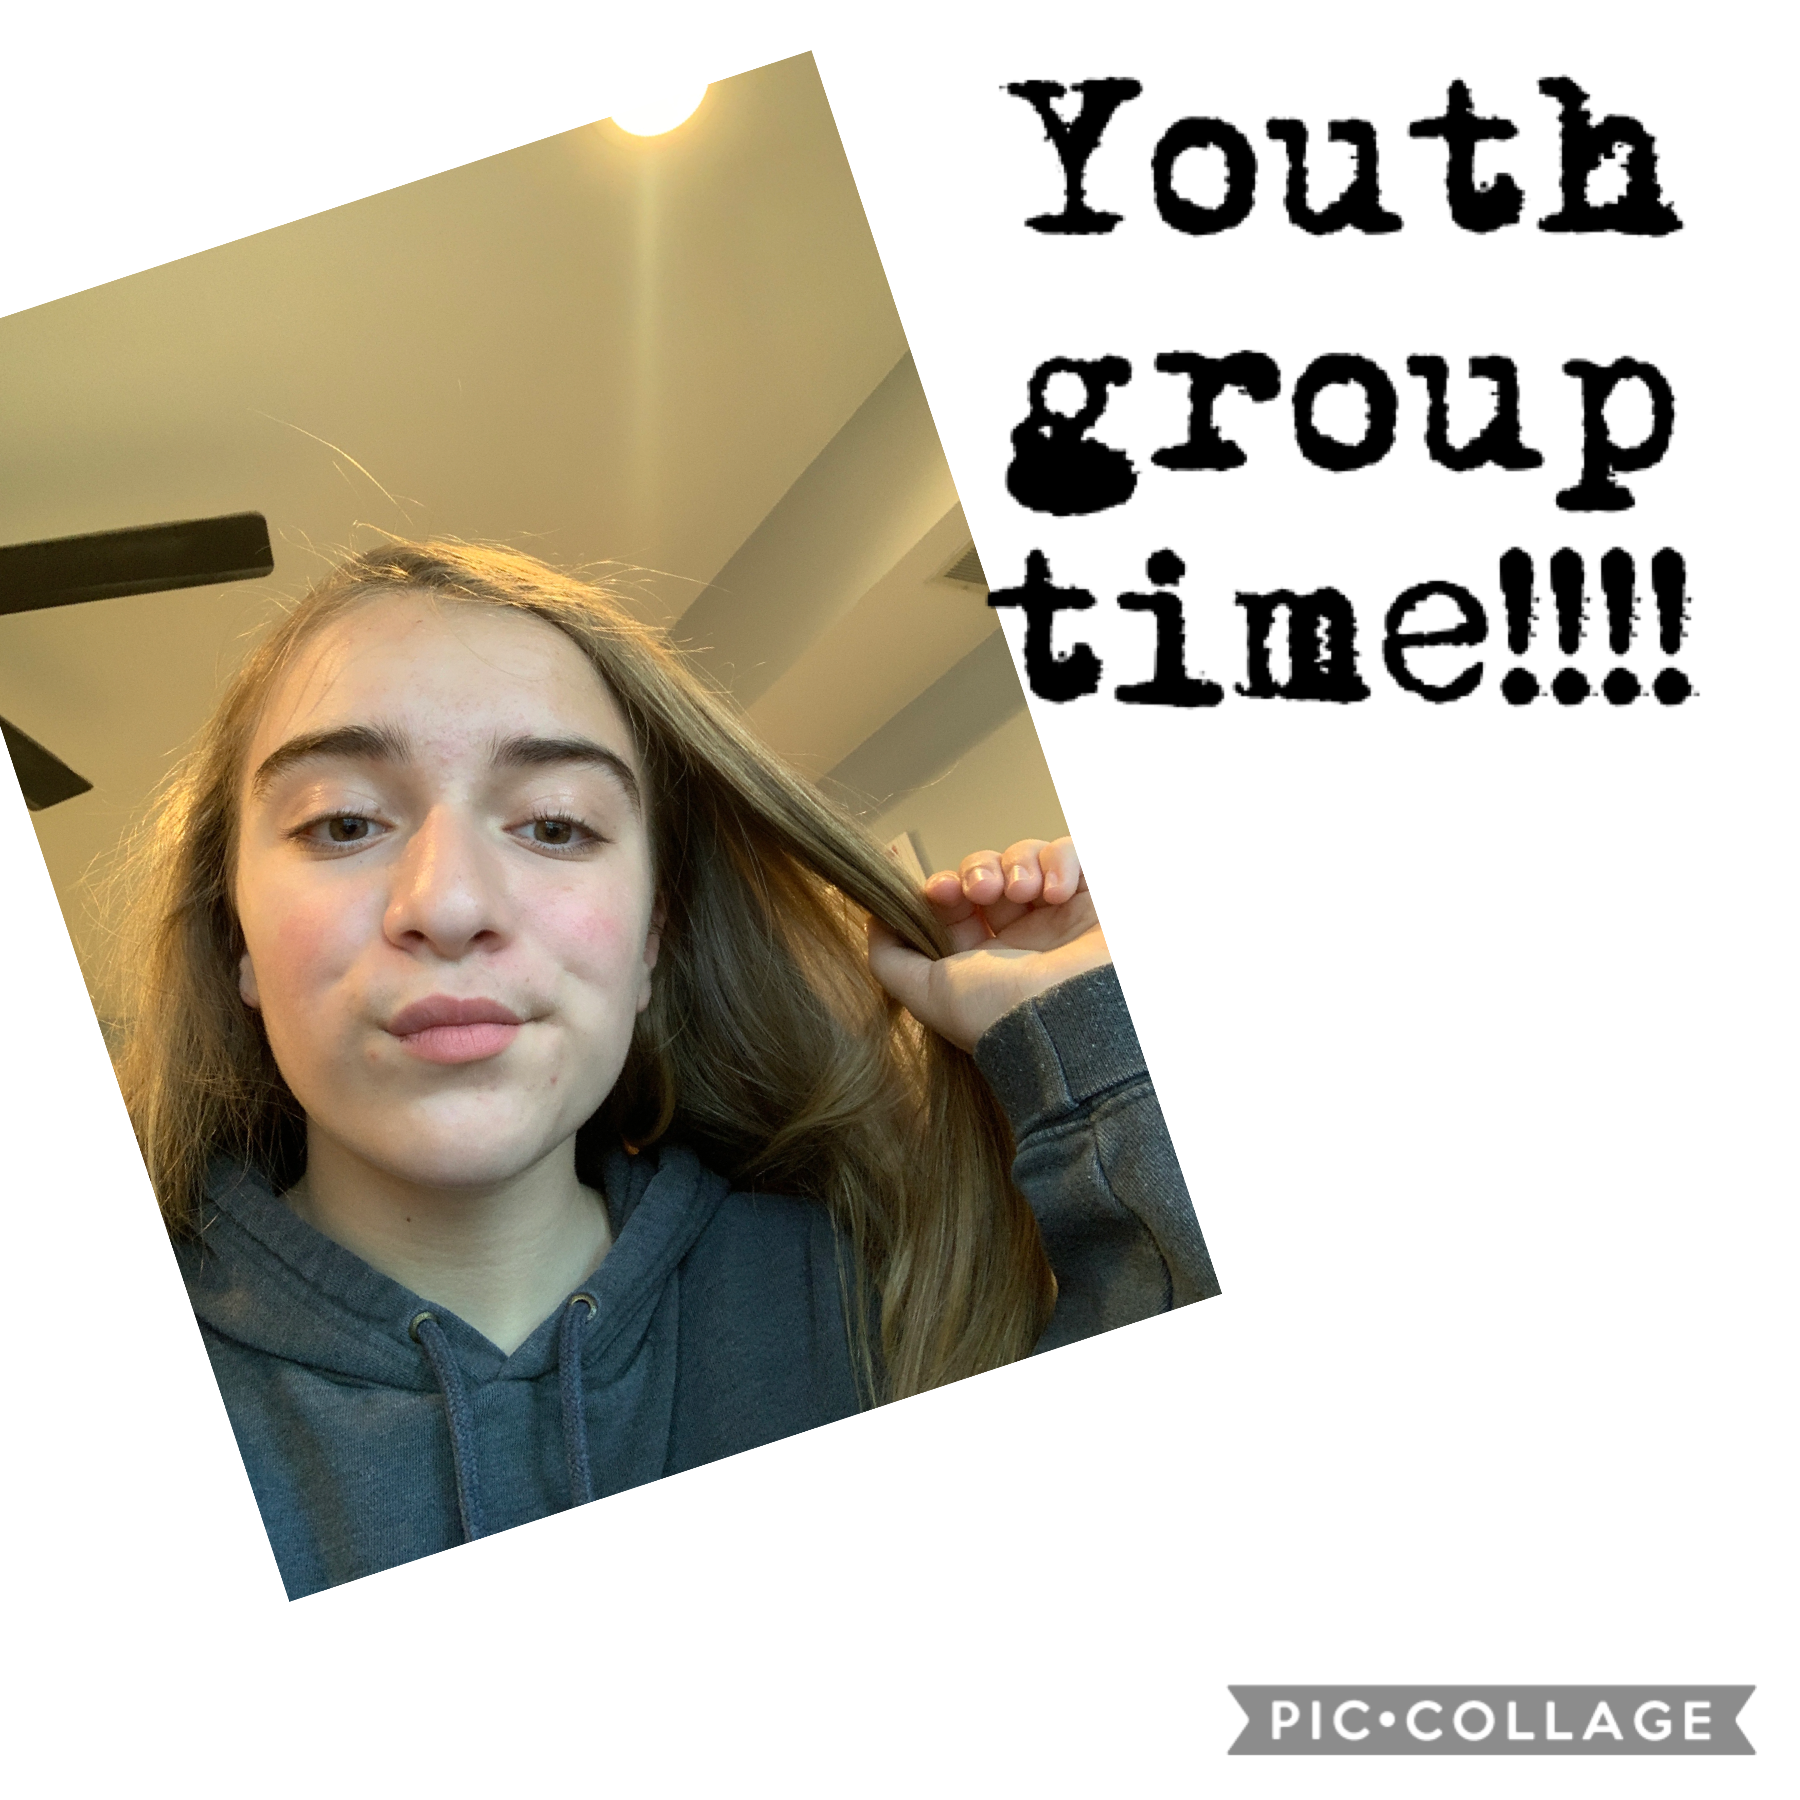 Youth group time!!!